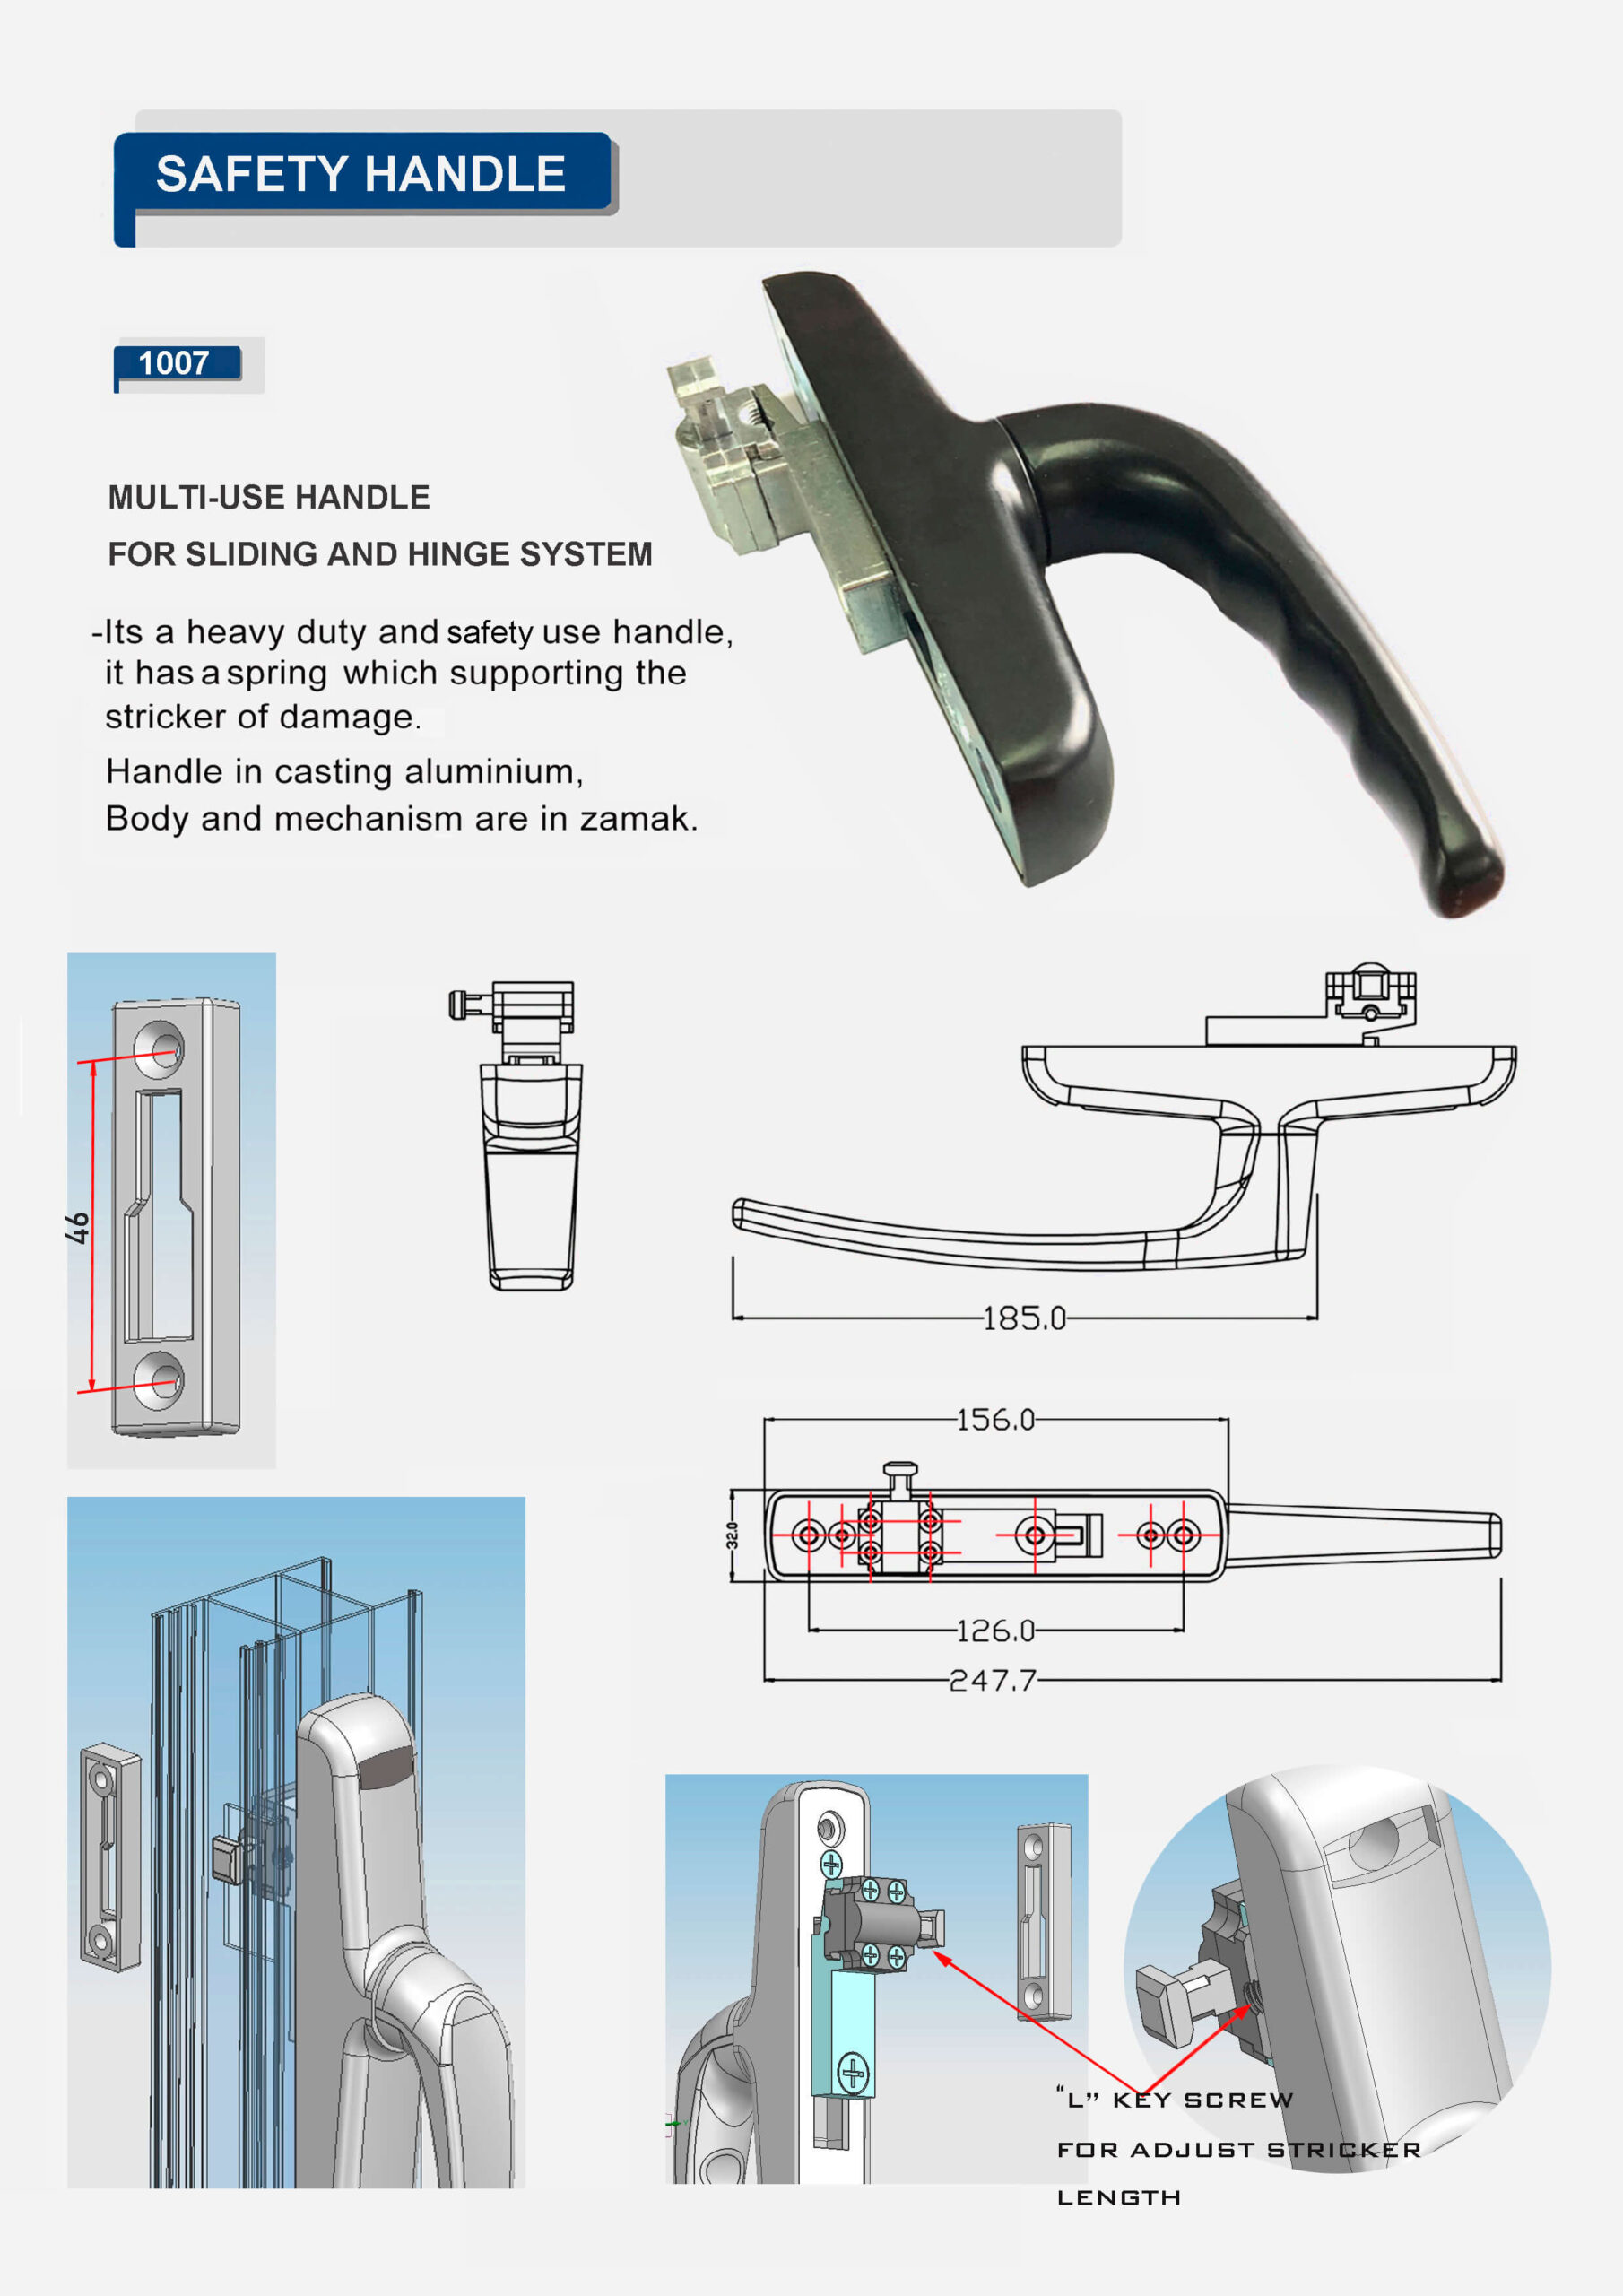 MULTI-USE HANDLE FOR SLIDING WINDOWS AND HINGE SYSTEM 1007